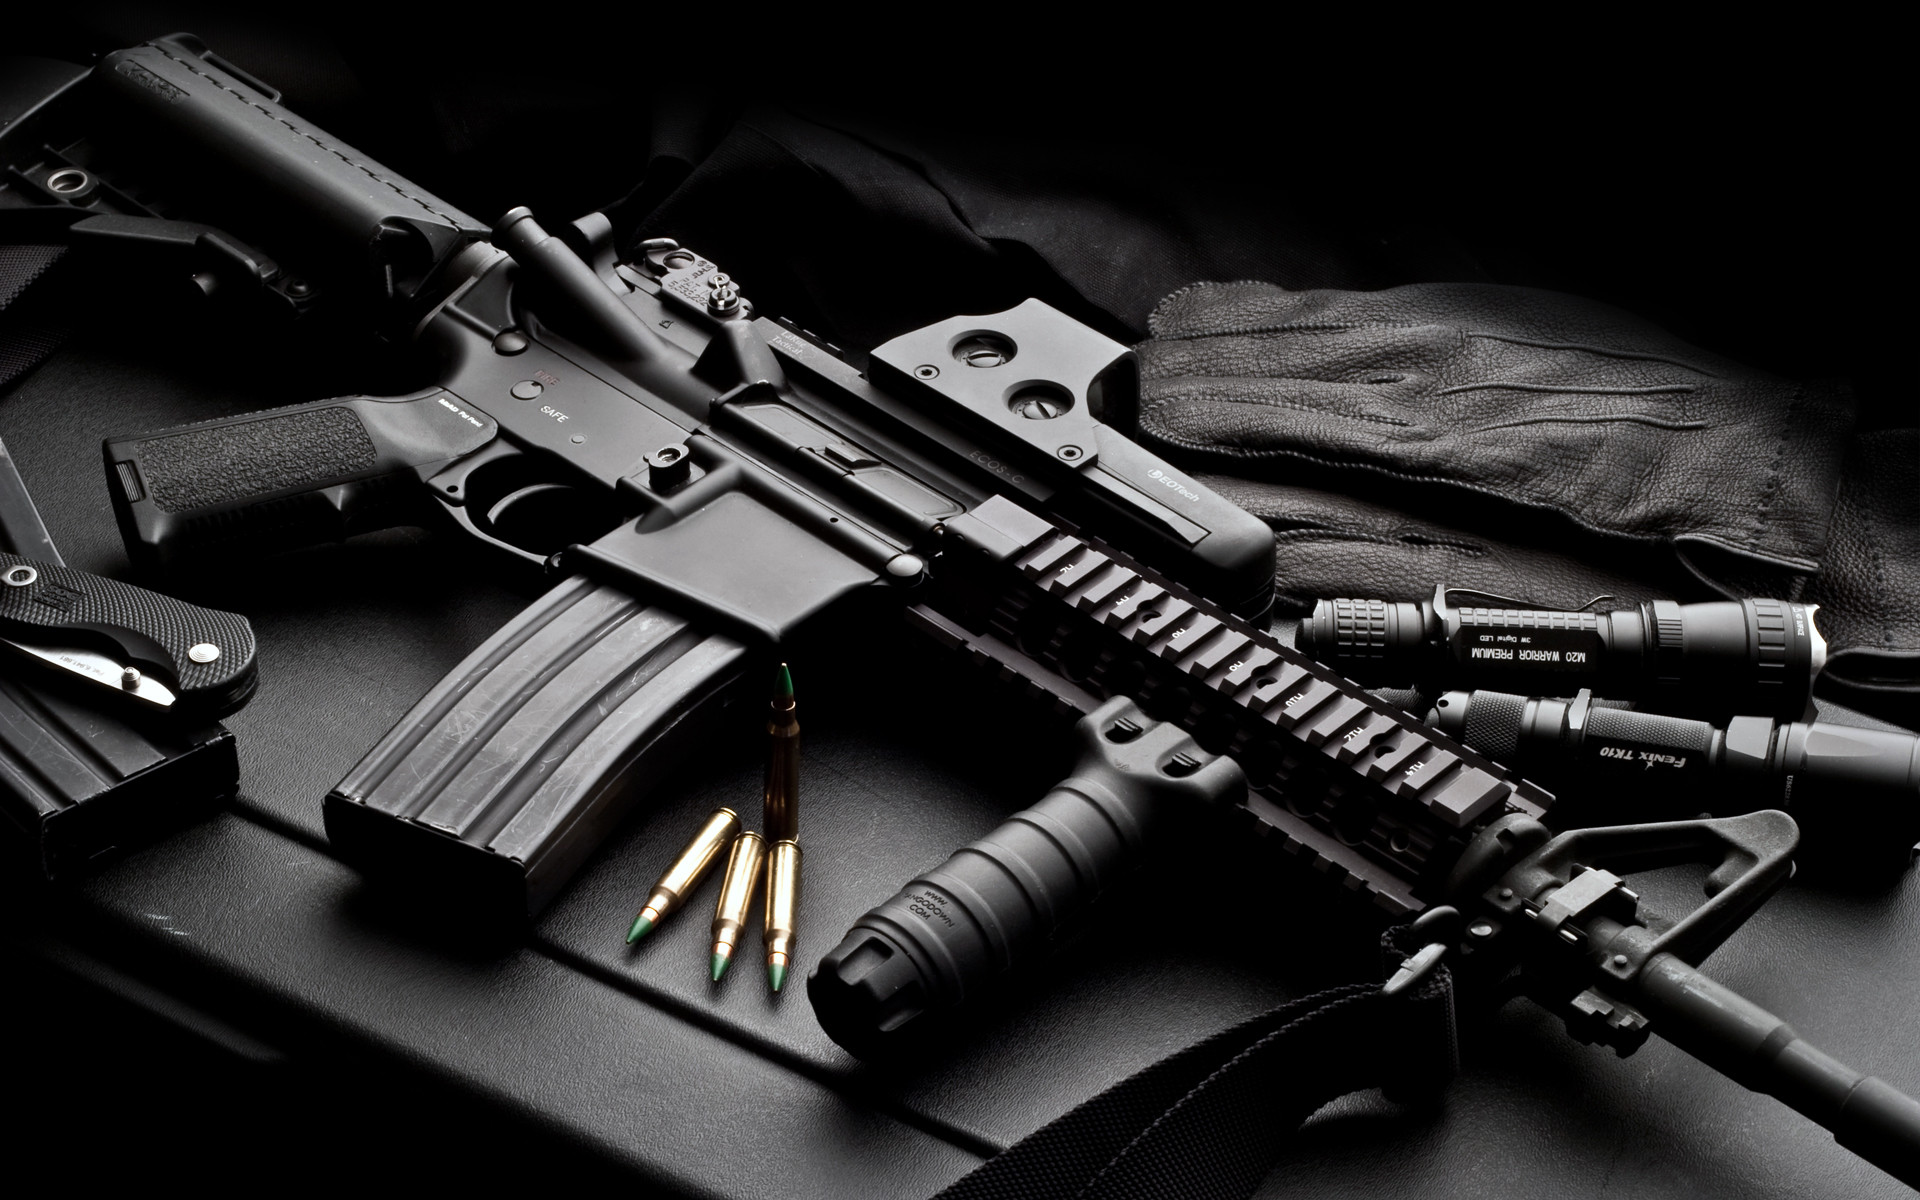 M16 Rifle Image For Desktop And Wallpaper Picture